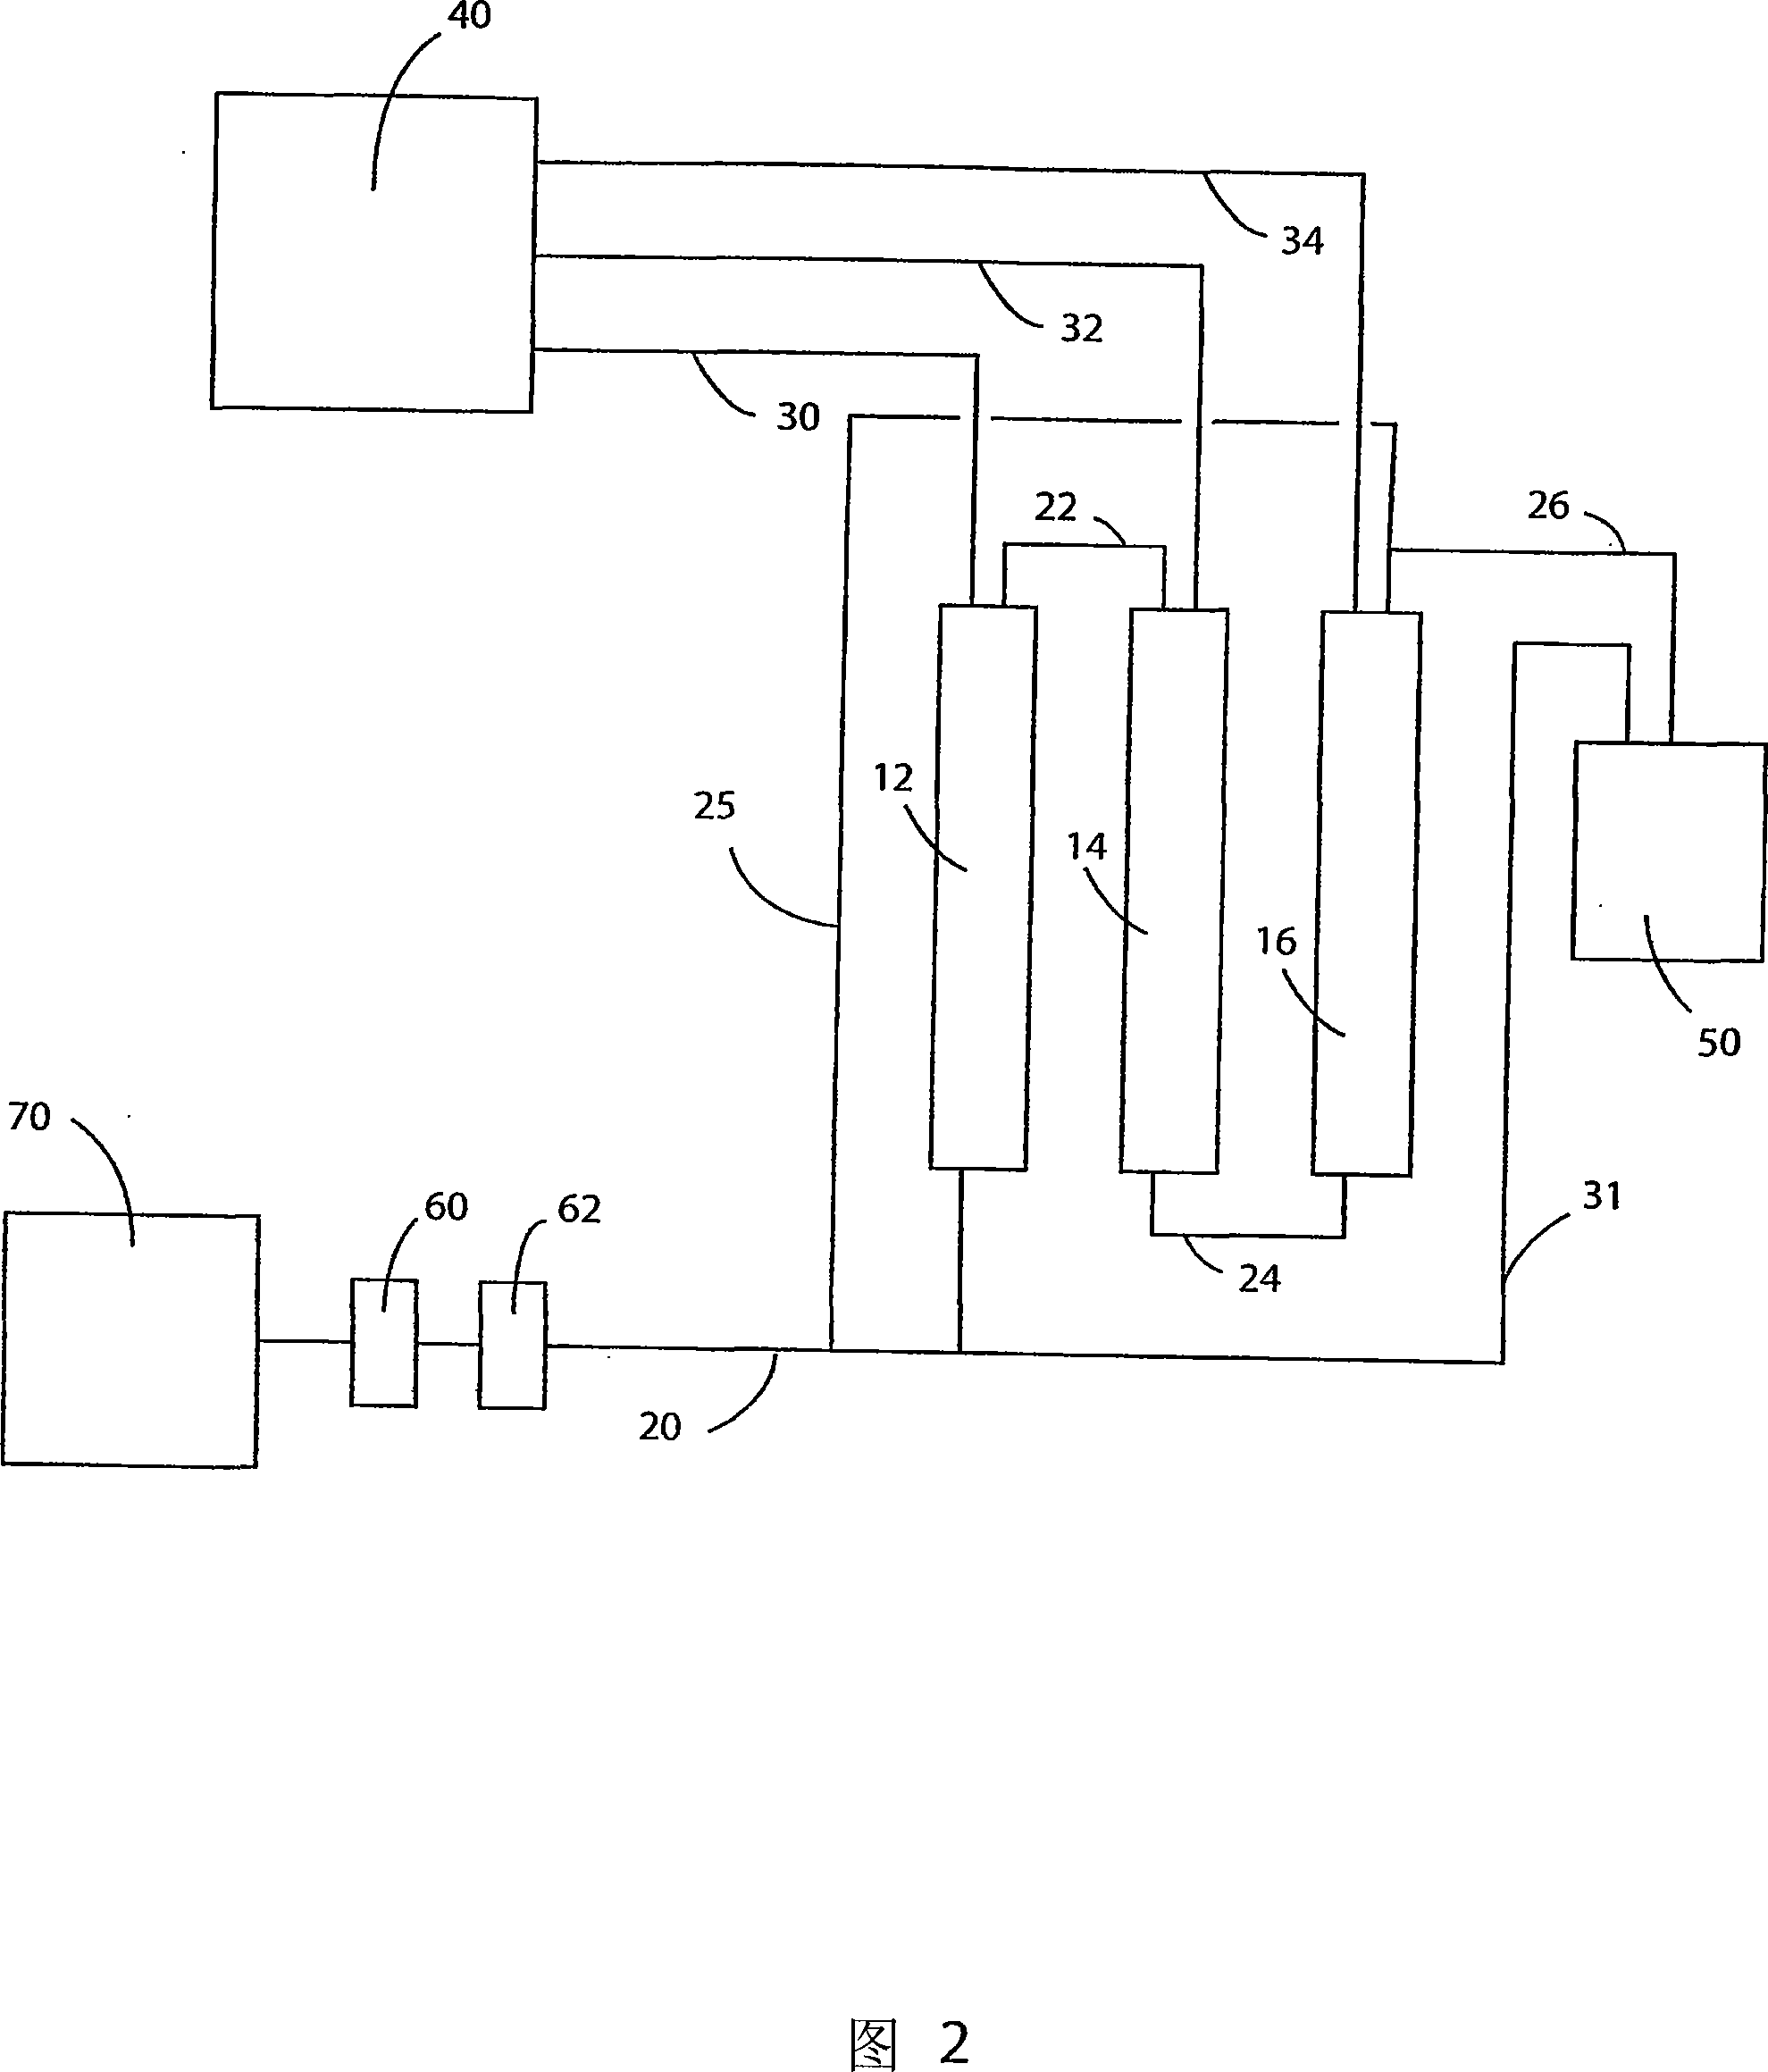 Extended-life water softening system, apparatus and method